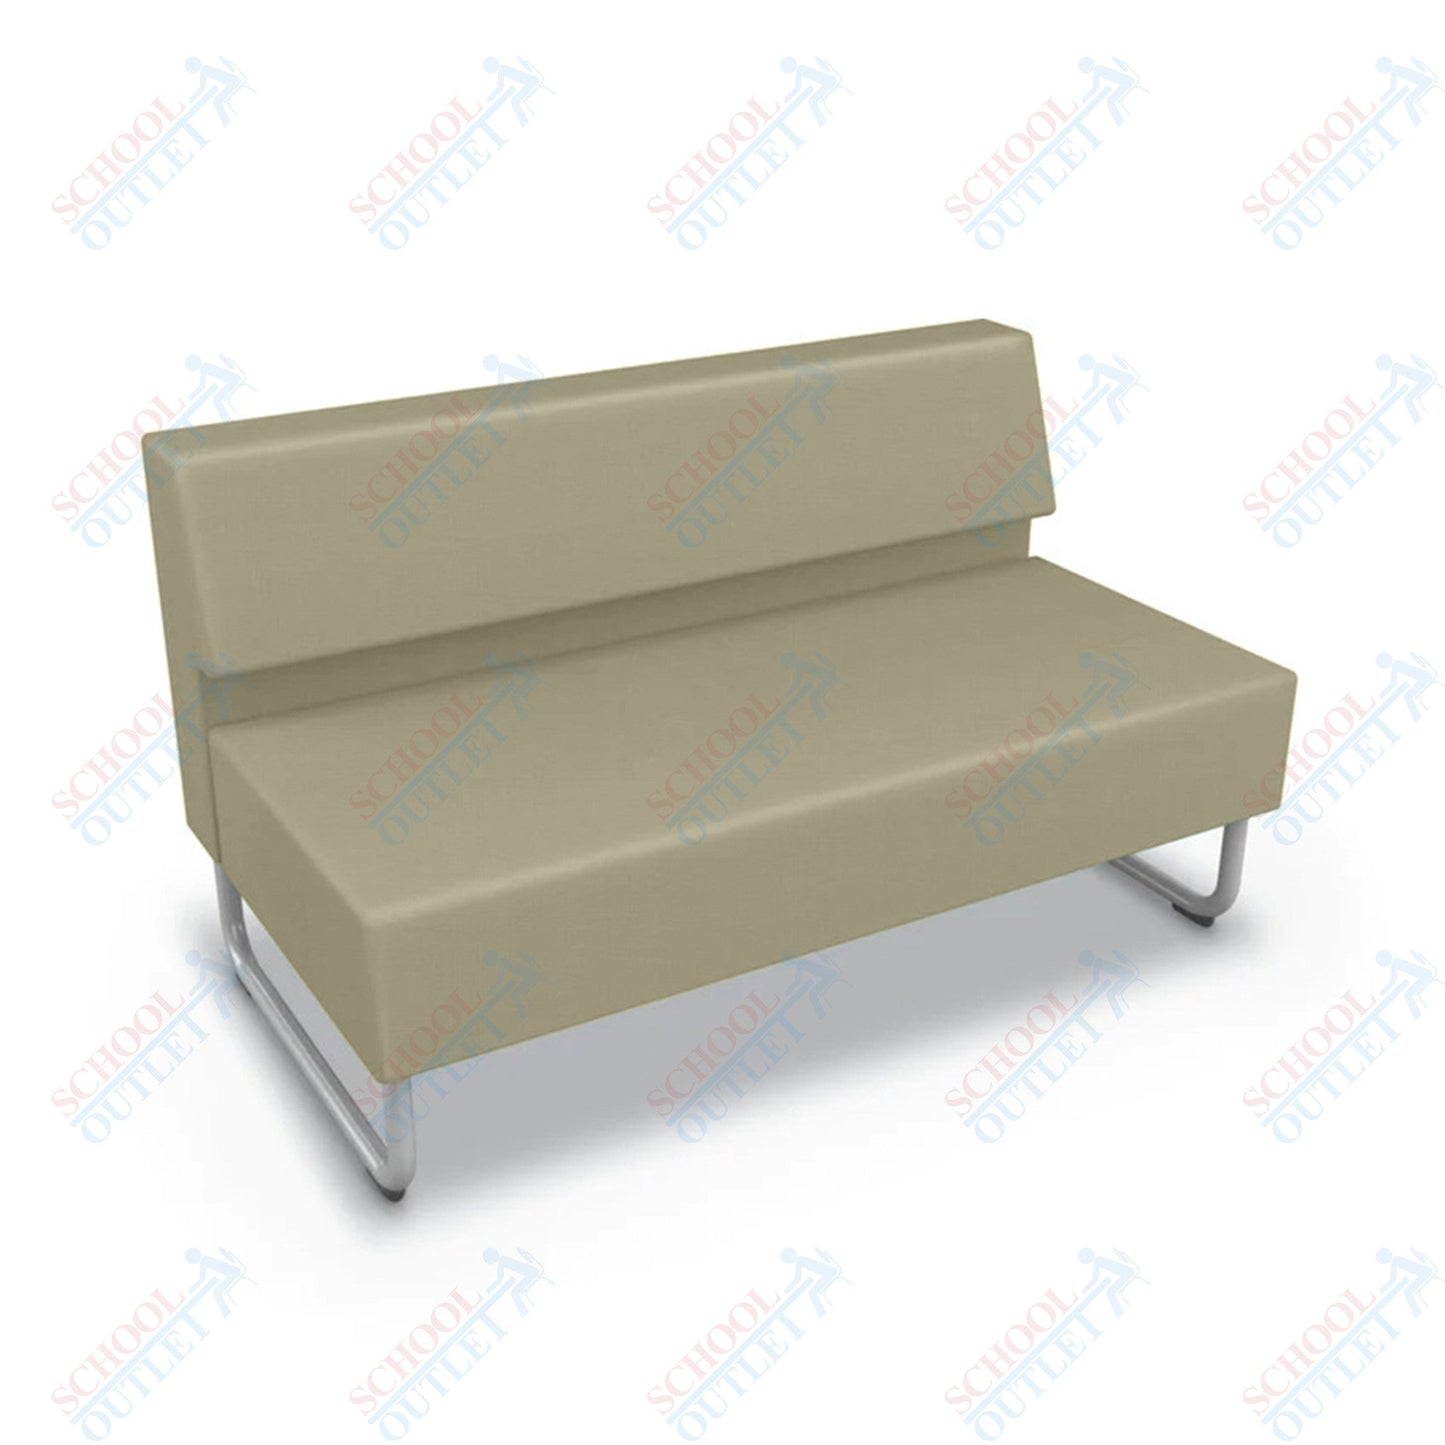 Mooreco Akt Soft Seating Lounge Loveseat - Armless - Grade 02 Fabric and Powder Coated Sled Legs - SchoolOutlet